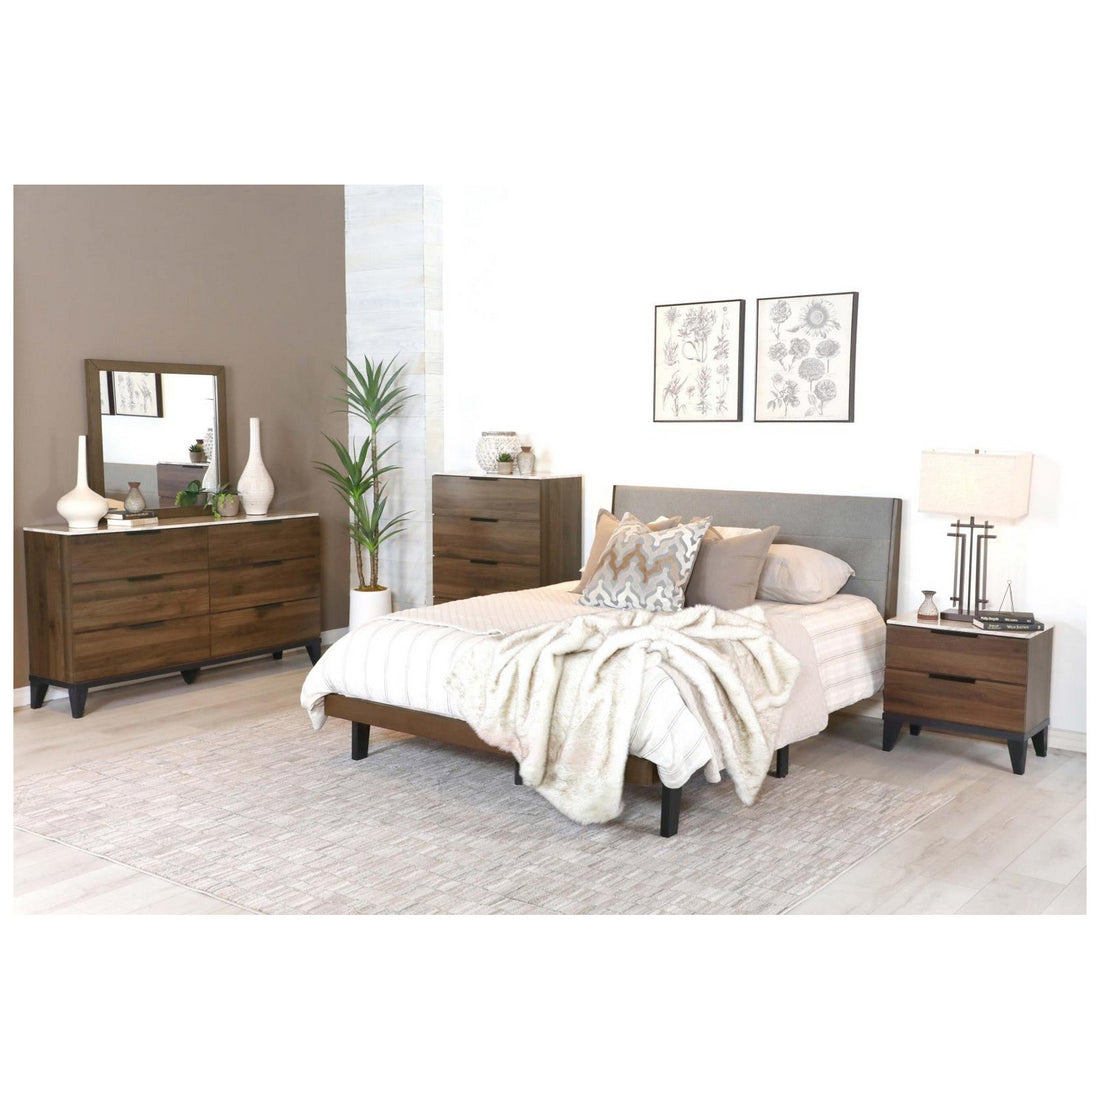 Mays 5-piece Upholstered Queen Bedroom Set Walnut Brown and Grey 215961Q-S5